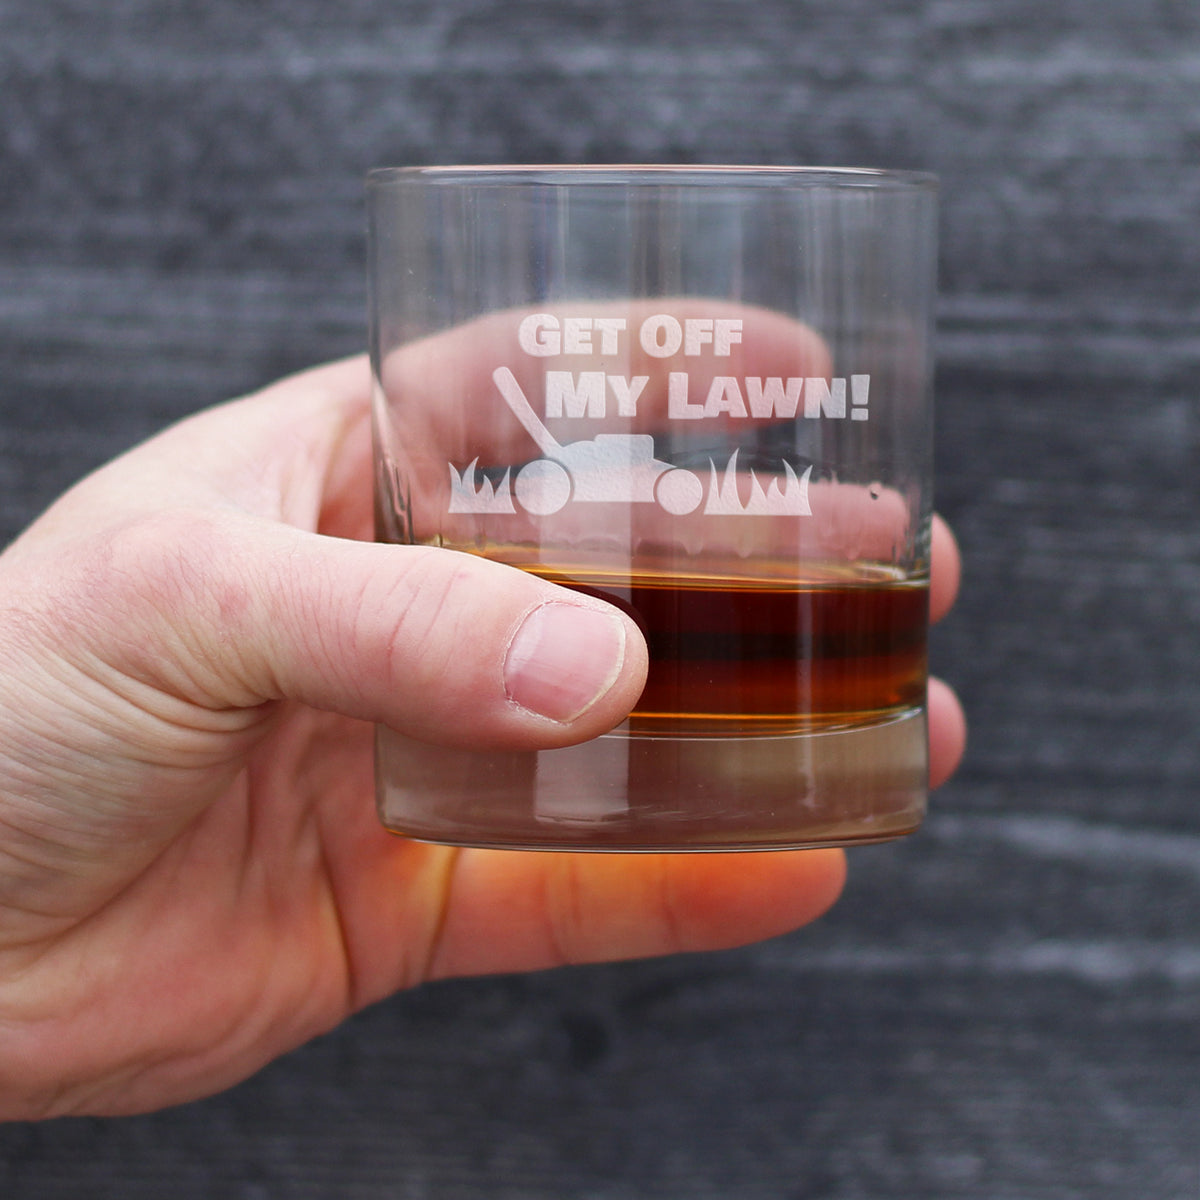 Get Off My Lawn - Whiskey Rocks Glass - Funny Birthday Gifts for Women and Men Over the Hill - 10.25 oz